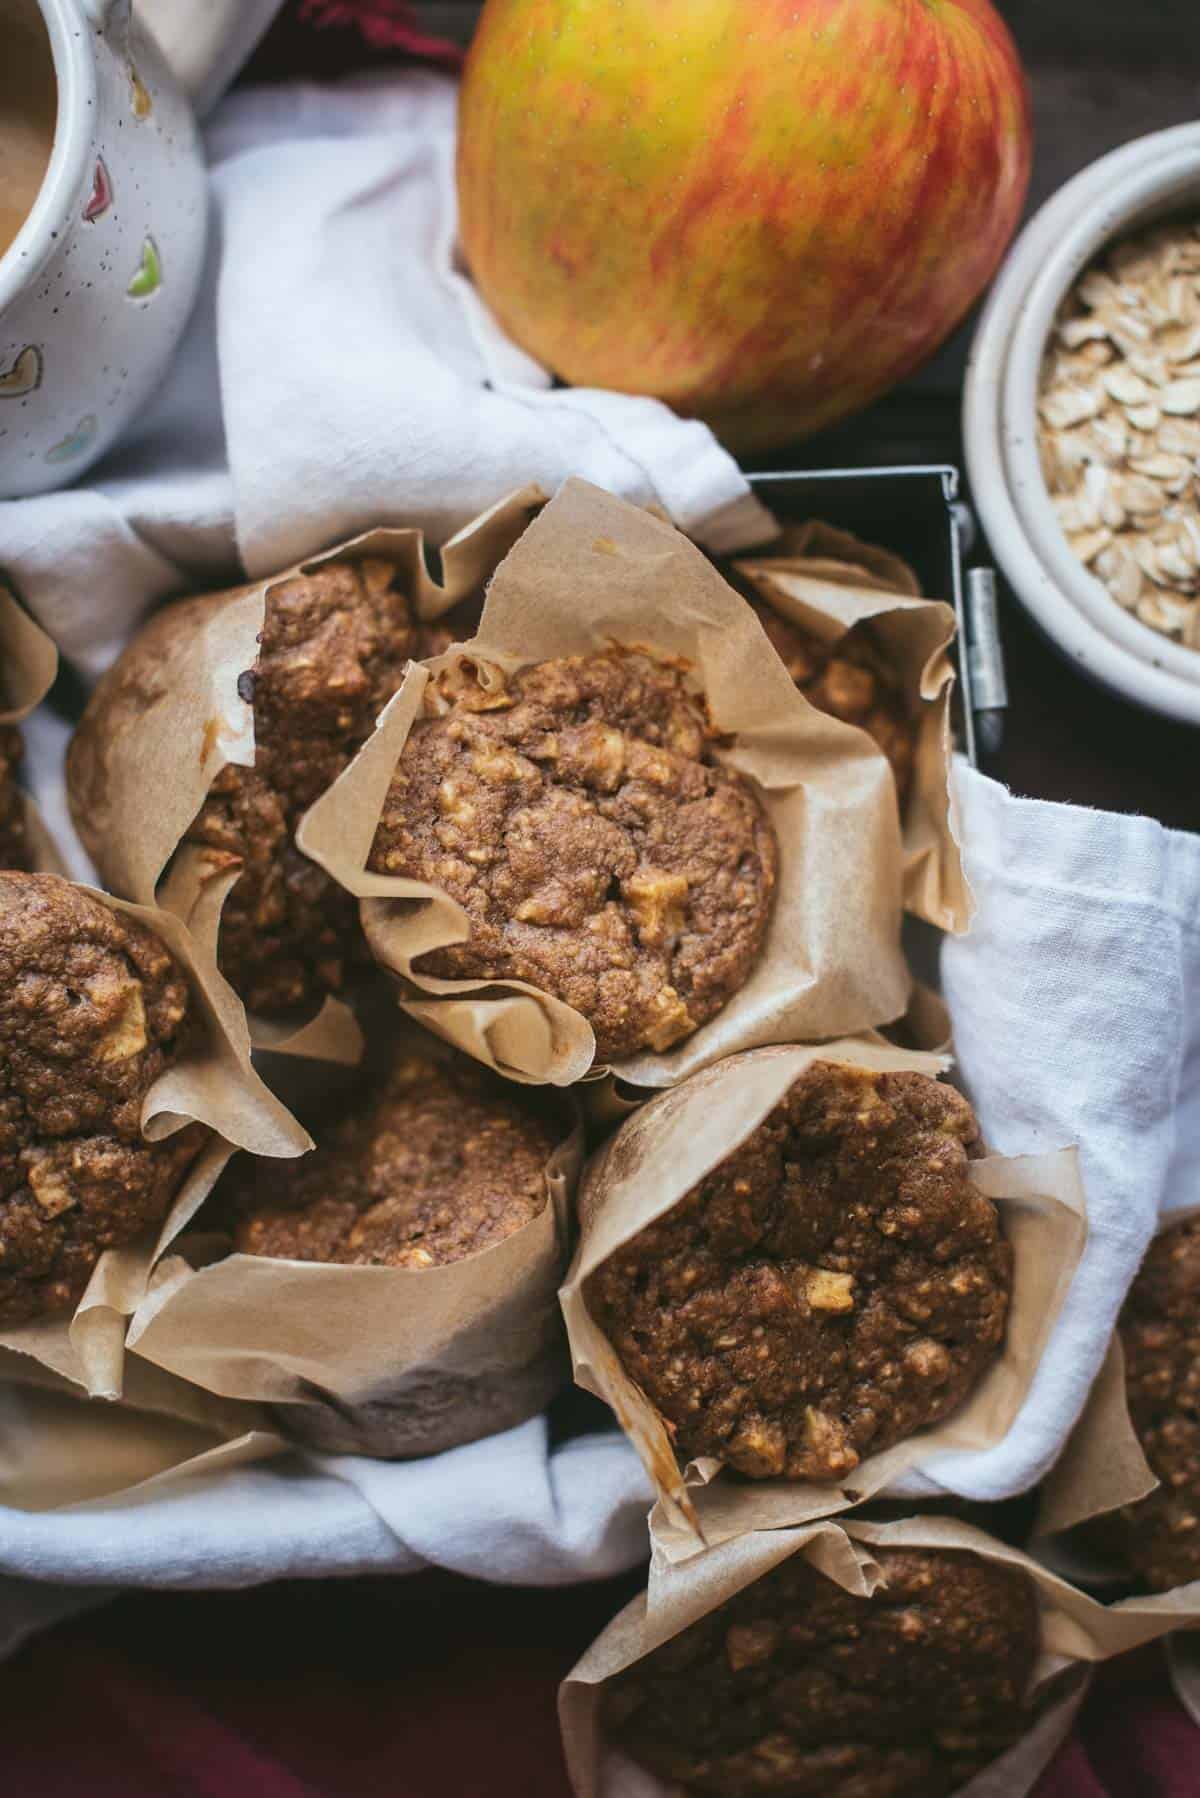 Healthy apple muffins, wrapped in brown paper sitting in a deep silver tray lined with white cloth. There is an additional apple in the corner as well as some leftover oats.